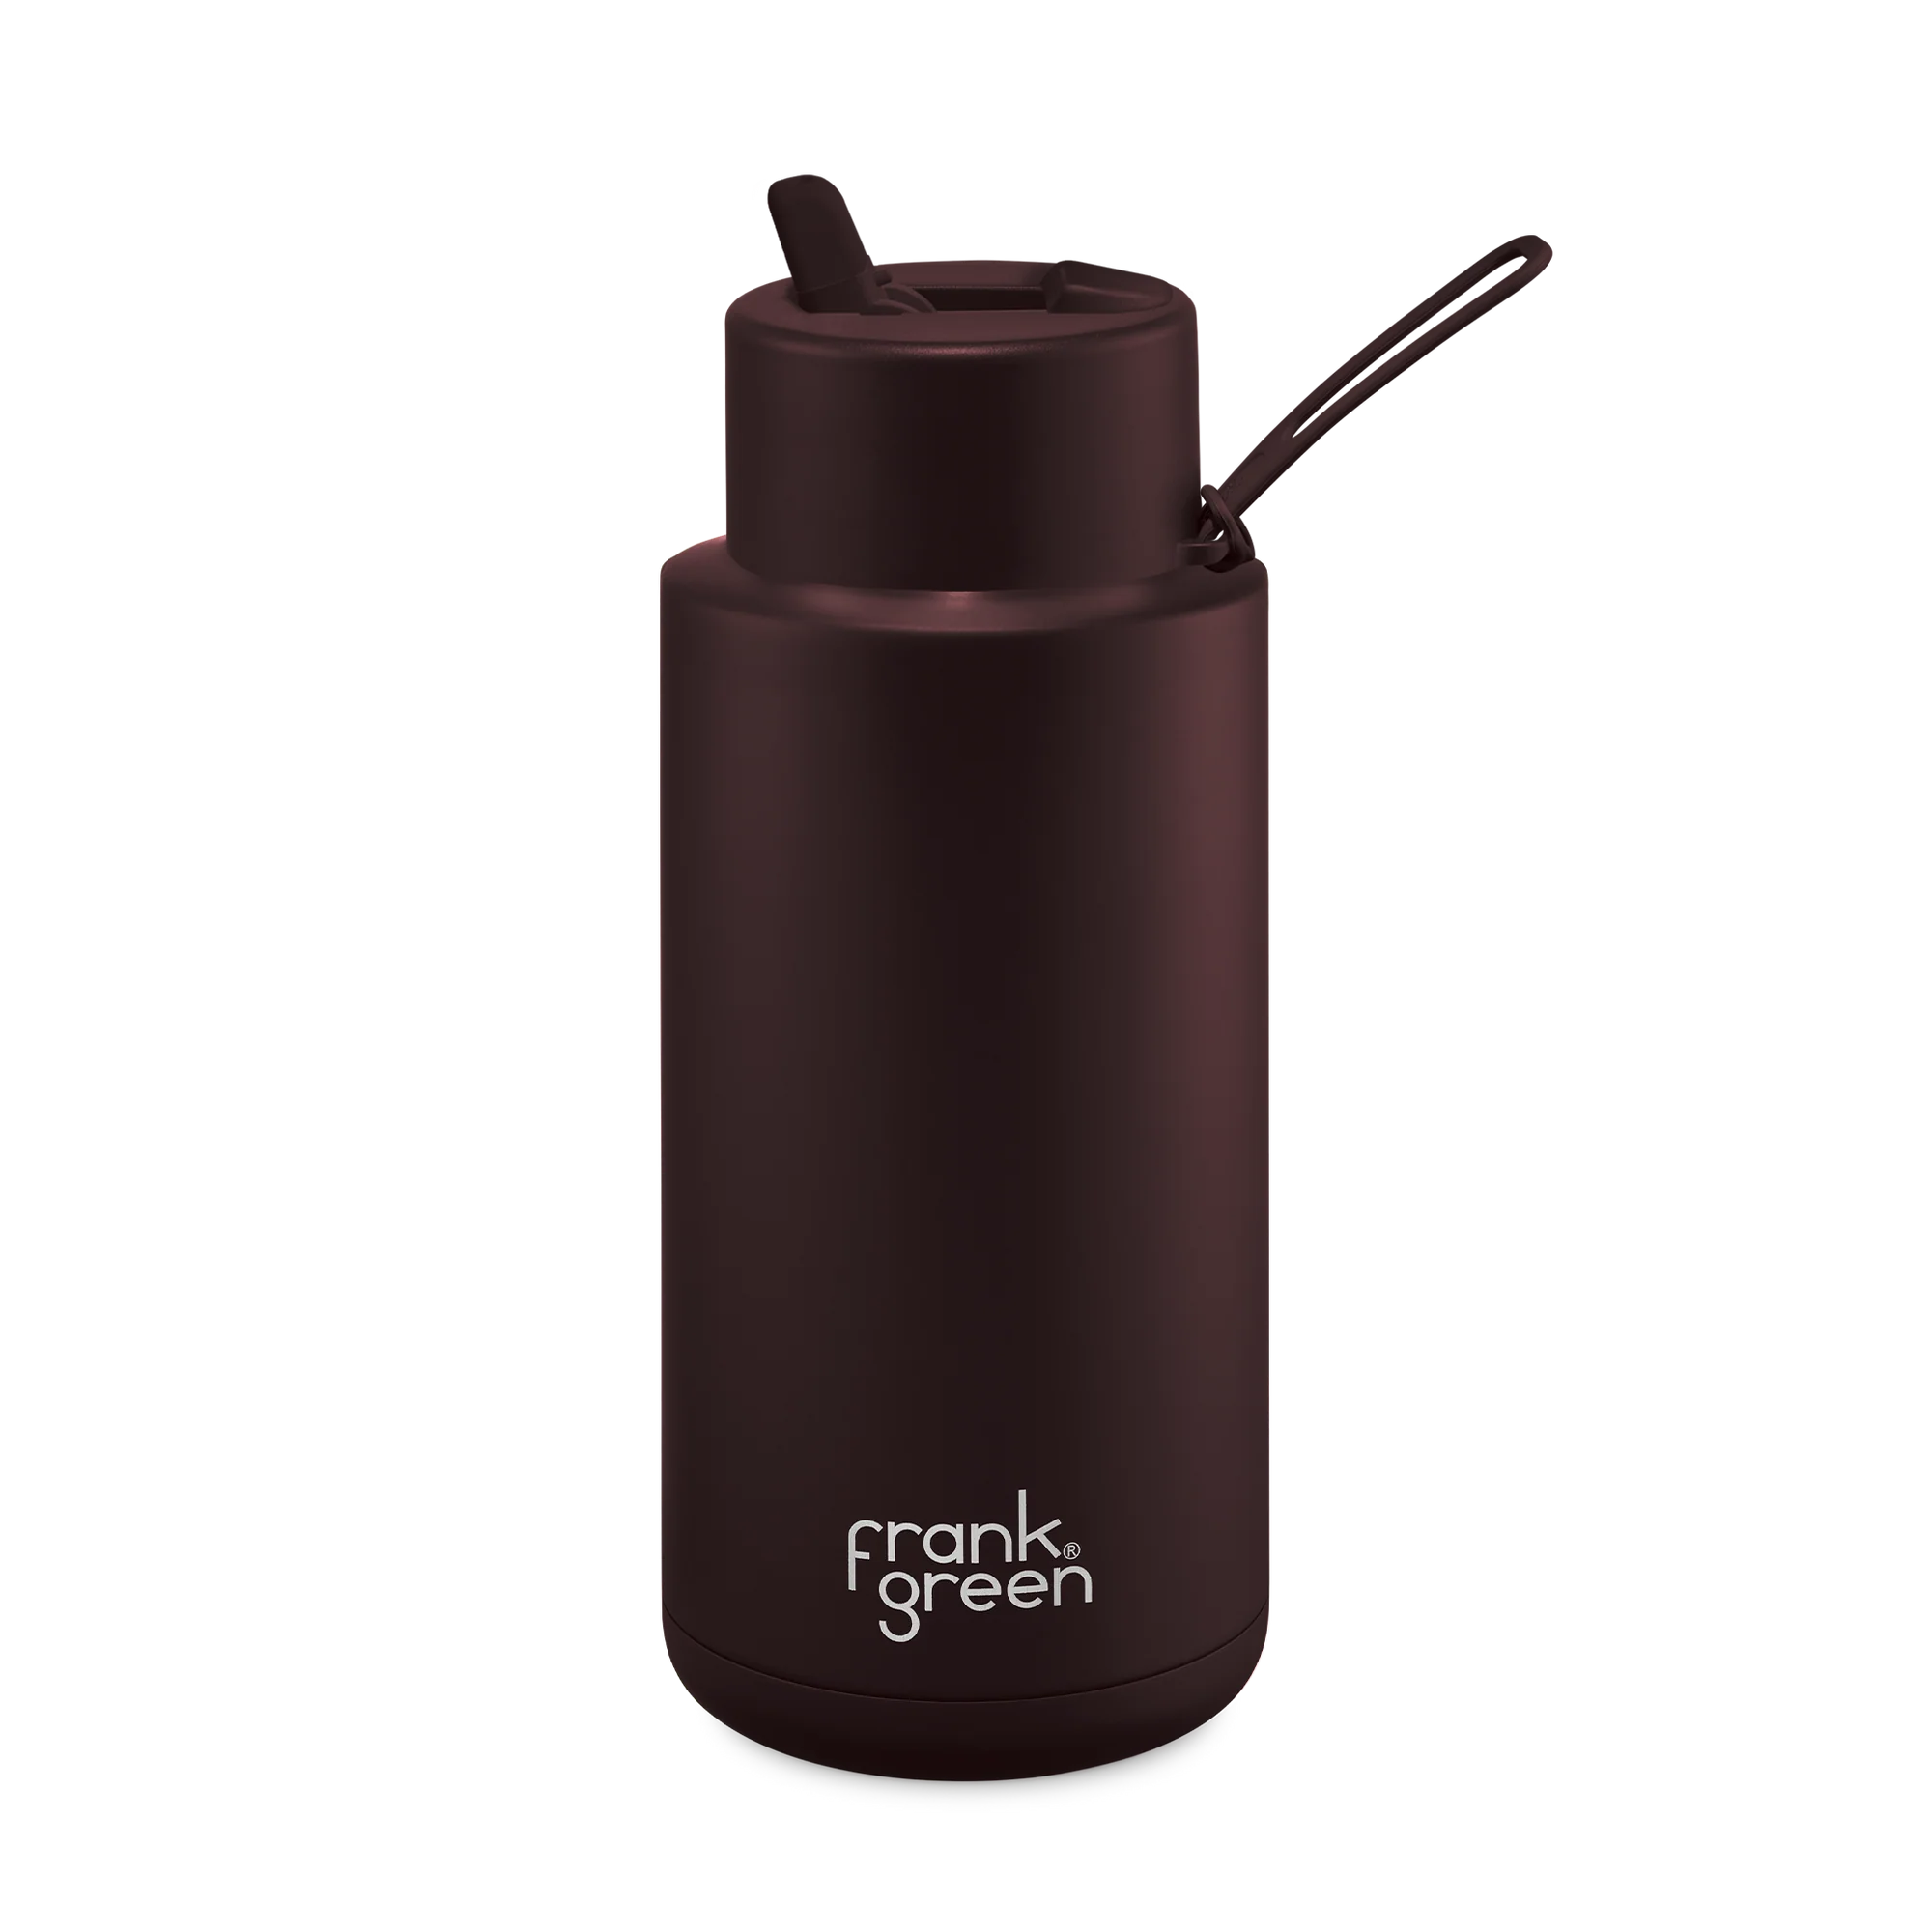 Frank Green Stainless Steel Ceramic Reusable Bottle Chocolate With Straw And Strap 34oz/1,000ml